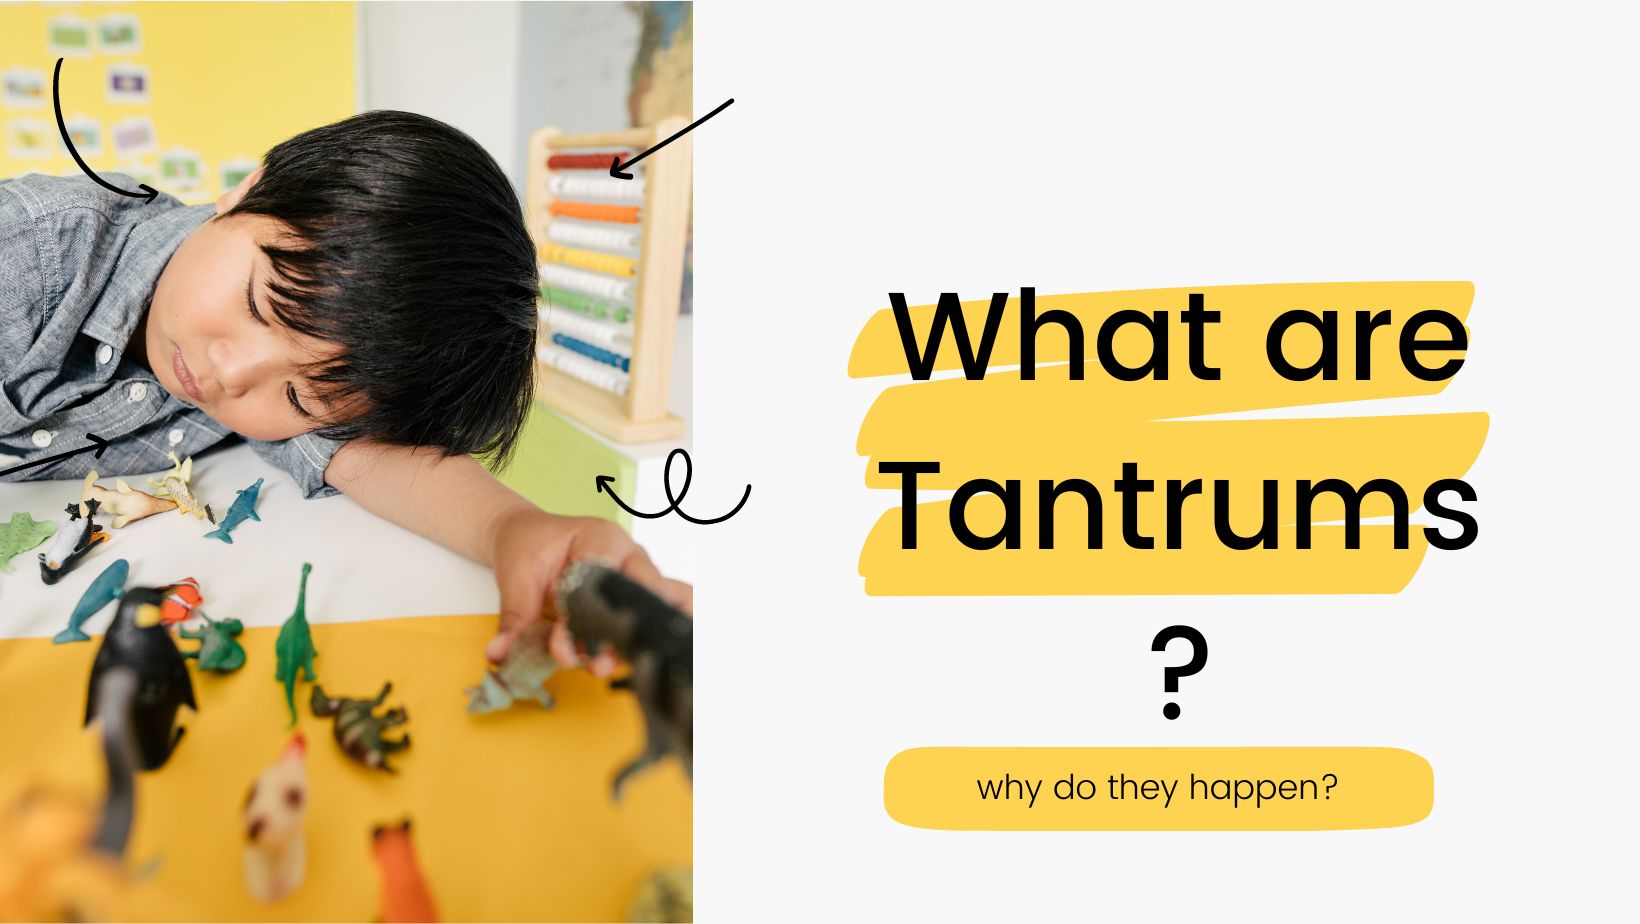 What are Tantrums, and why do they happen?